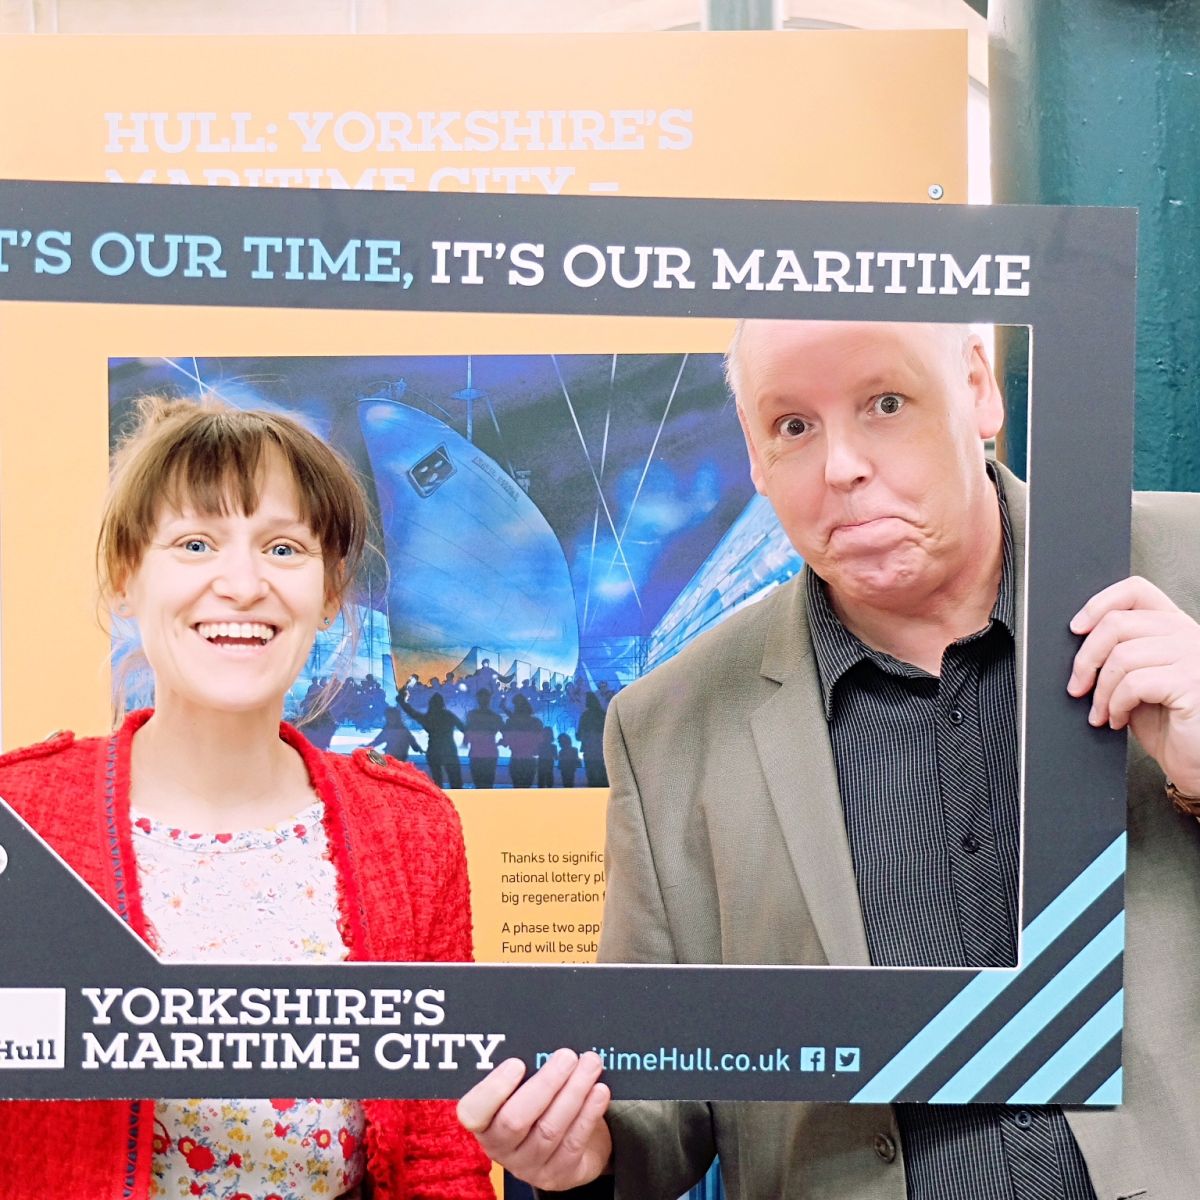 Exhibition specialists pose in the maritime selfie frame